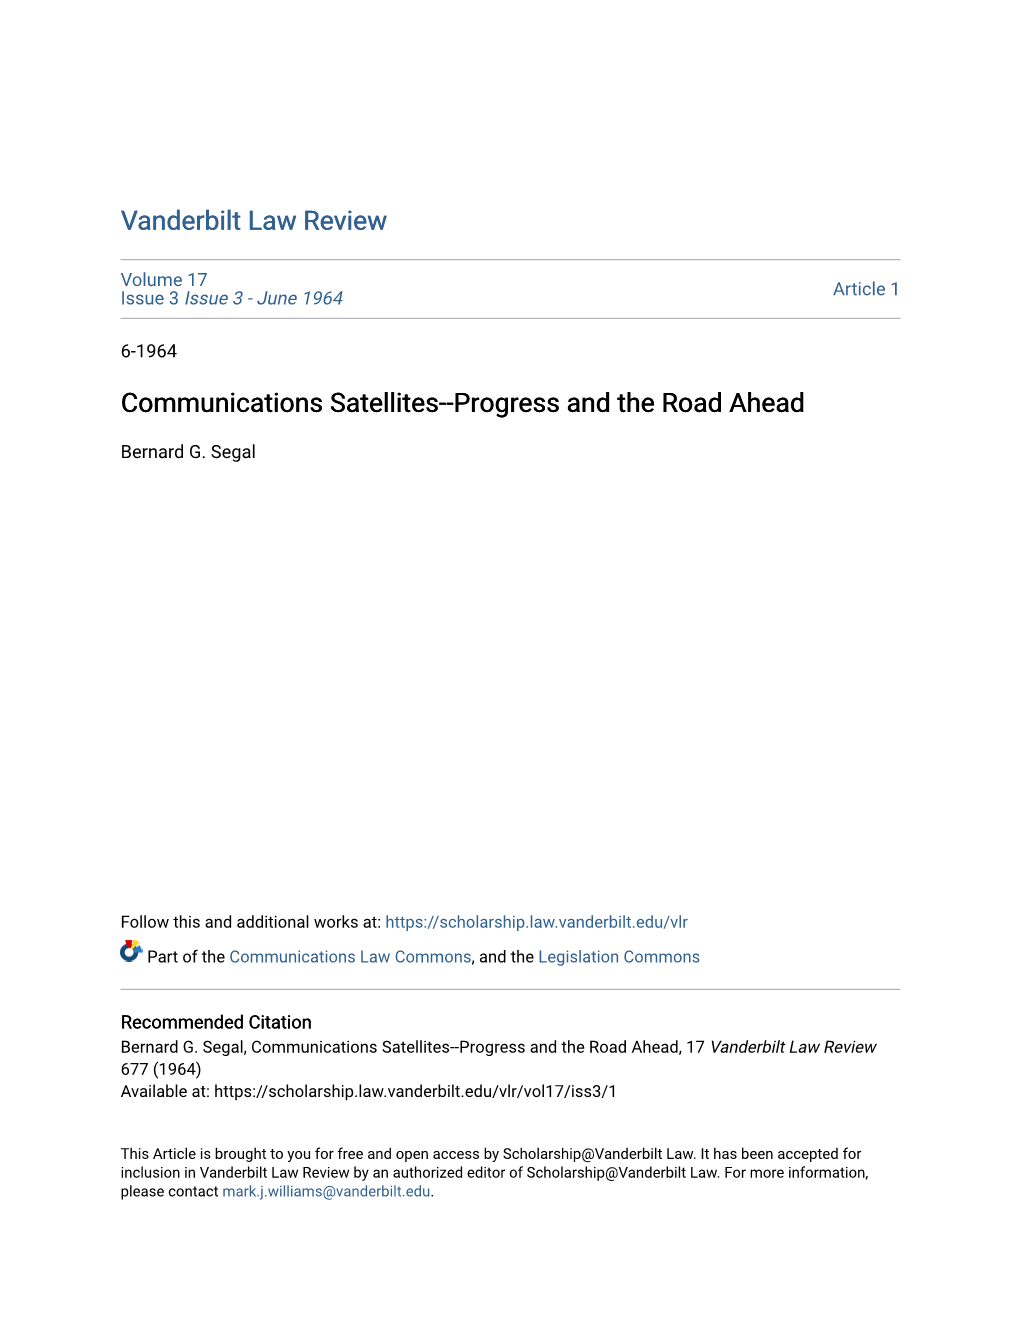 Communications Satellites--Progress and the Road Ahead